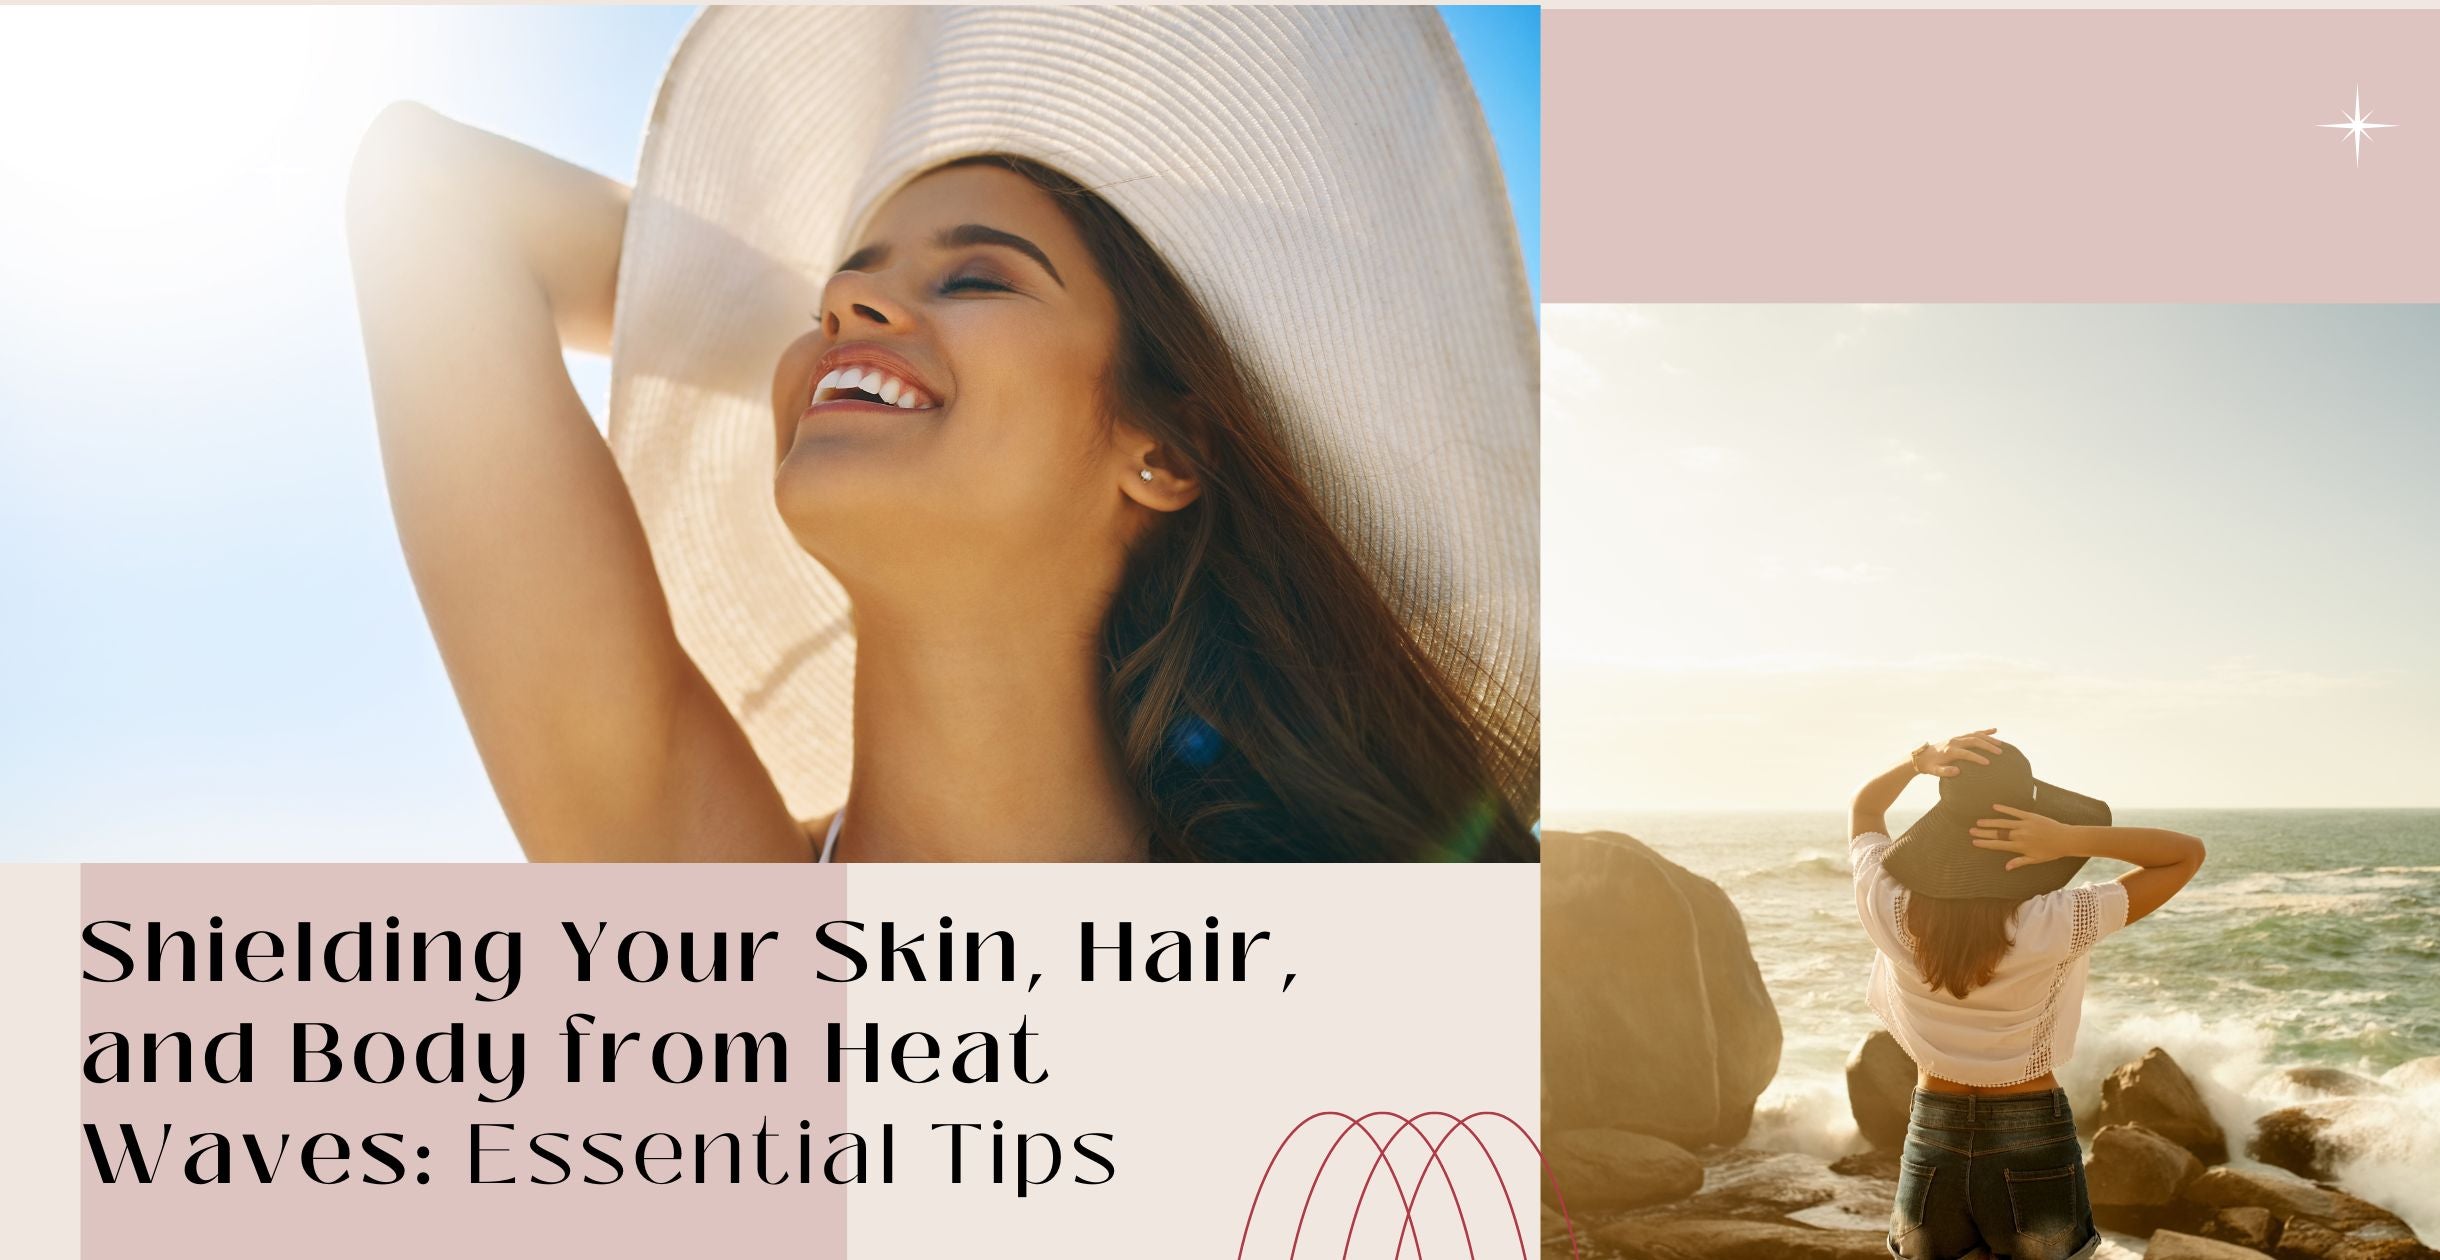 Shielding Your Skin, Hair, and Body from Heat Waves: Essential Tips